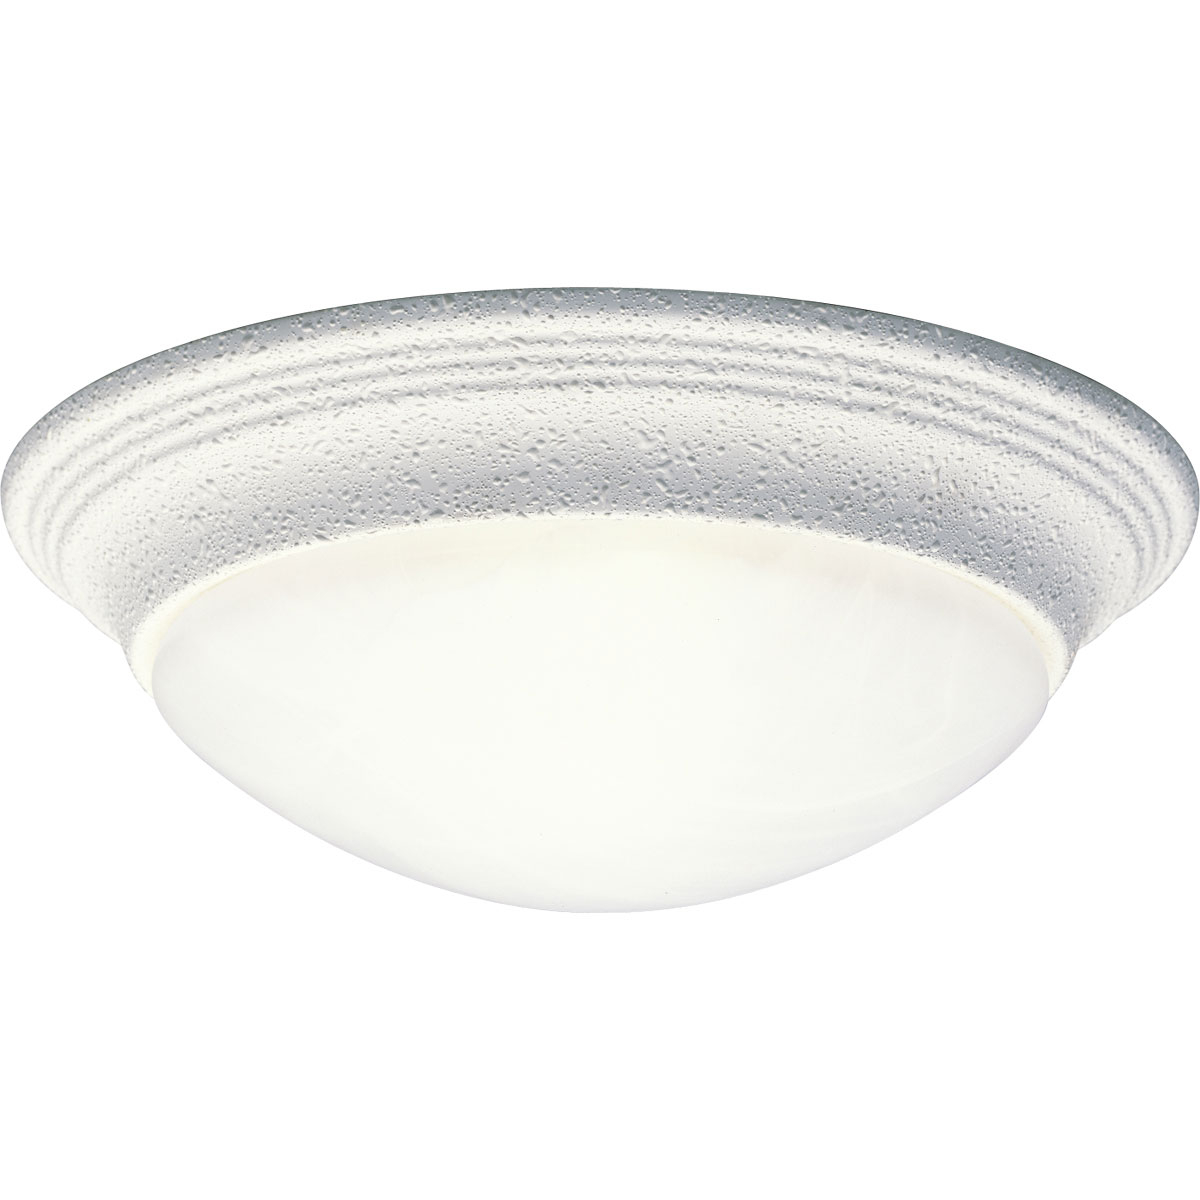 One-light 11-1/2 inch close-to-ceiling fixture with etched alabaster style glass bowl and White finish. Twist on glass for easy relamping. This fixture is perfect for bedrooms, closets, pantries, hallways and many other areas of the home. The simple styling coordinates with many different looks throughout the home.